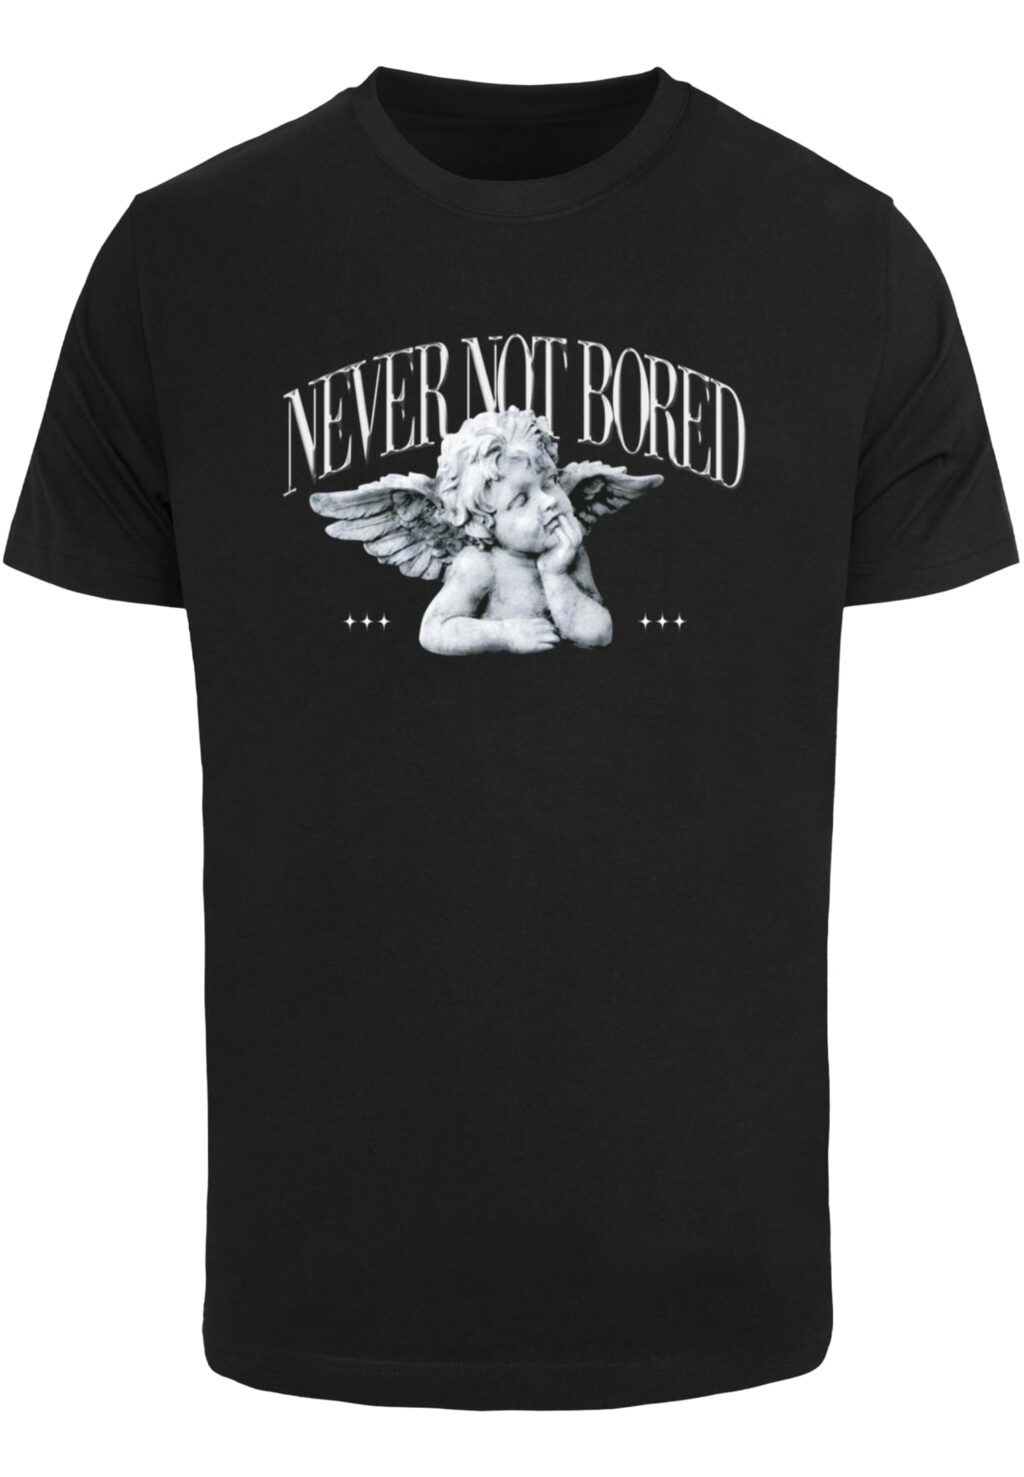 Never Not Bored Tee black MT3037